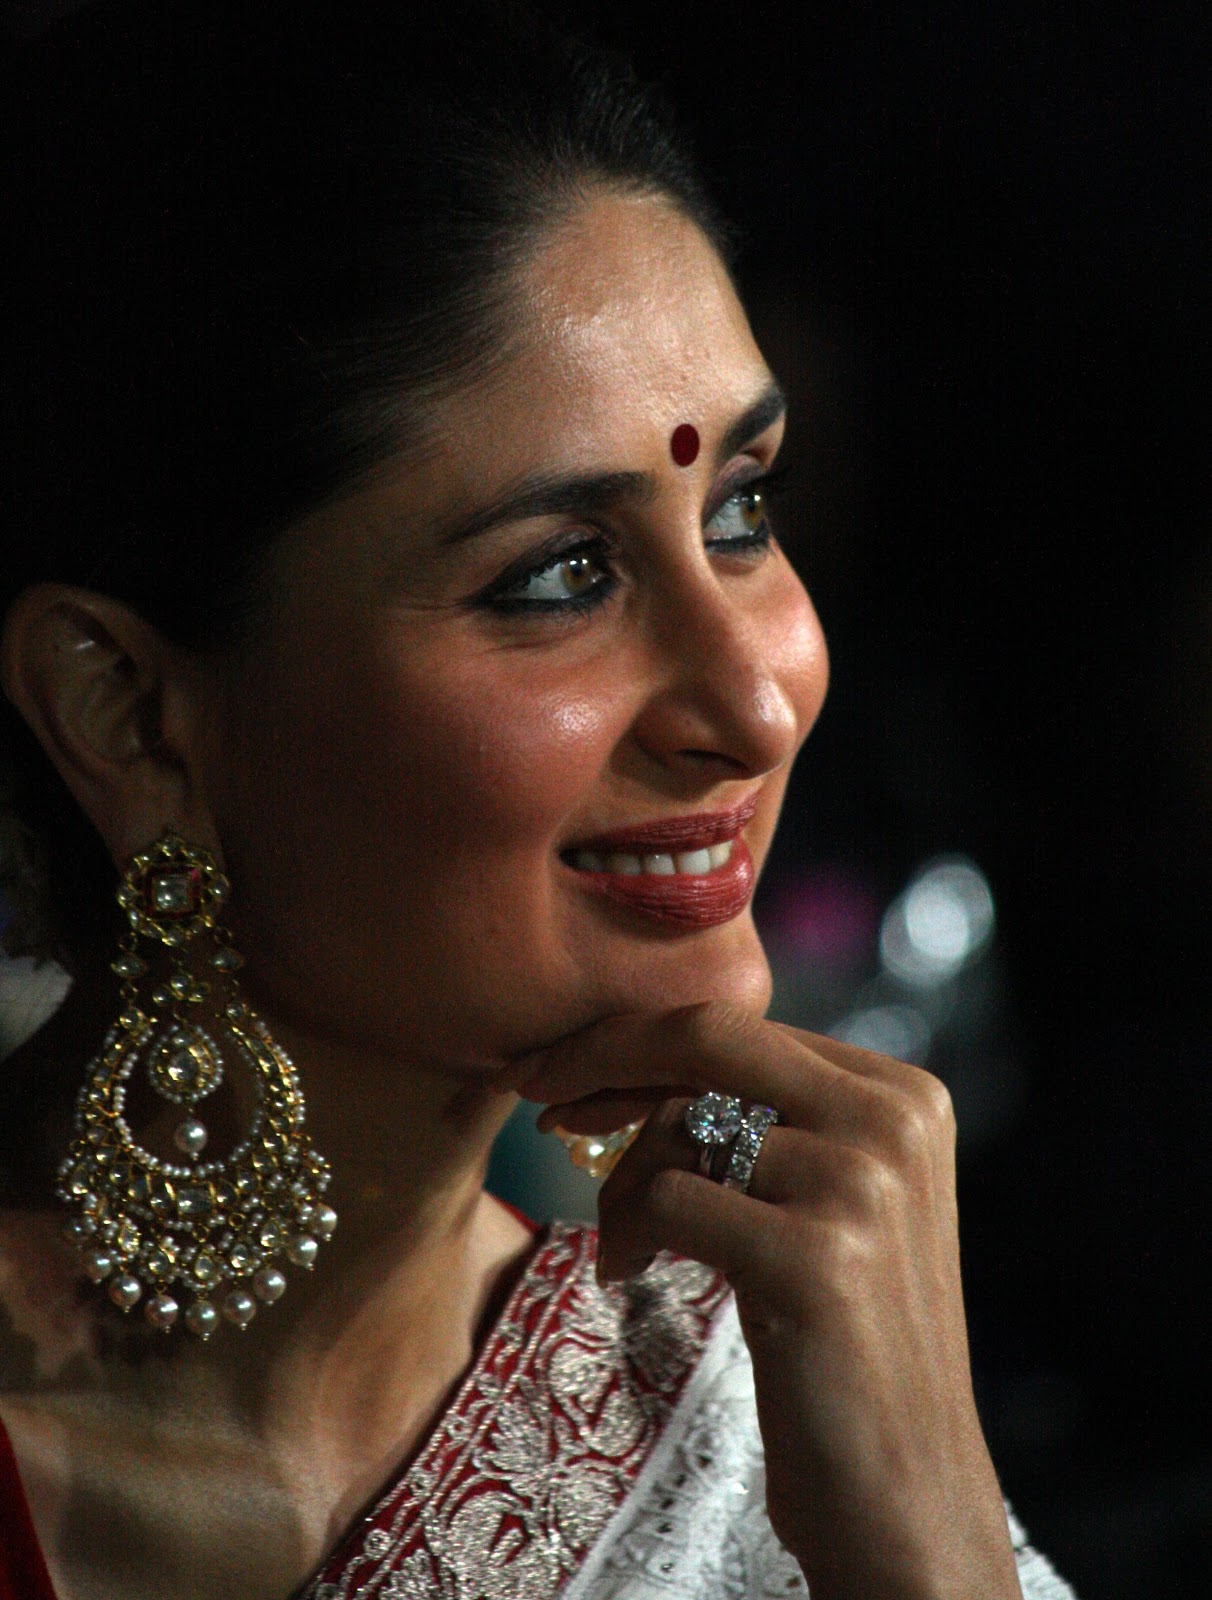 High Quality Bollywood Celebrity Pictures Kareena Kapoor Looks Gorgeous In White Saree With Red